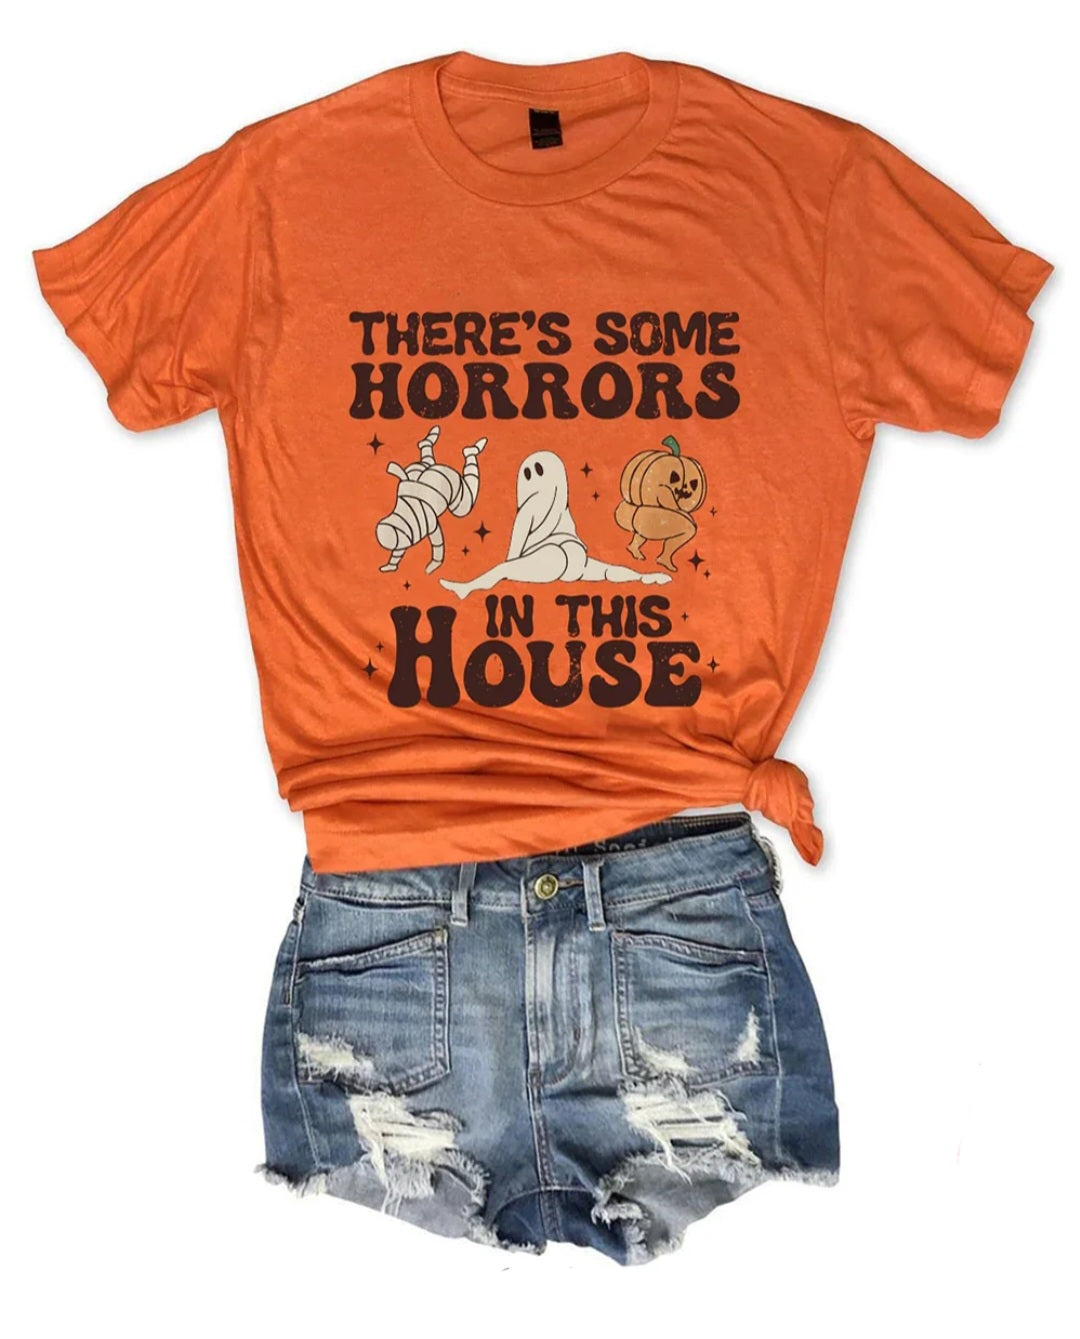 There's Some Horrors In This House shirt Option 2